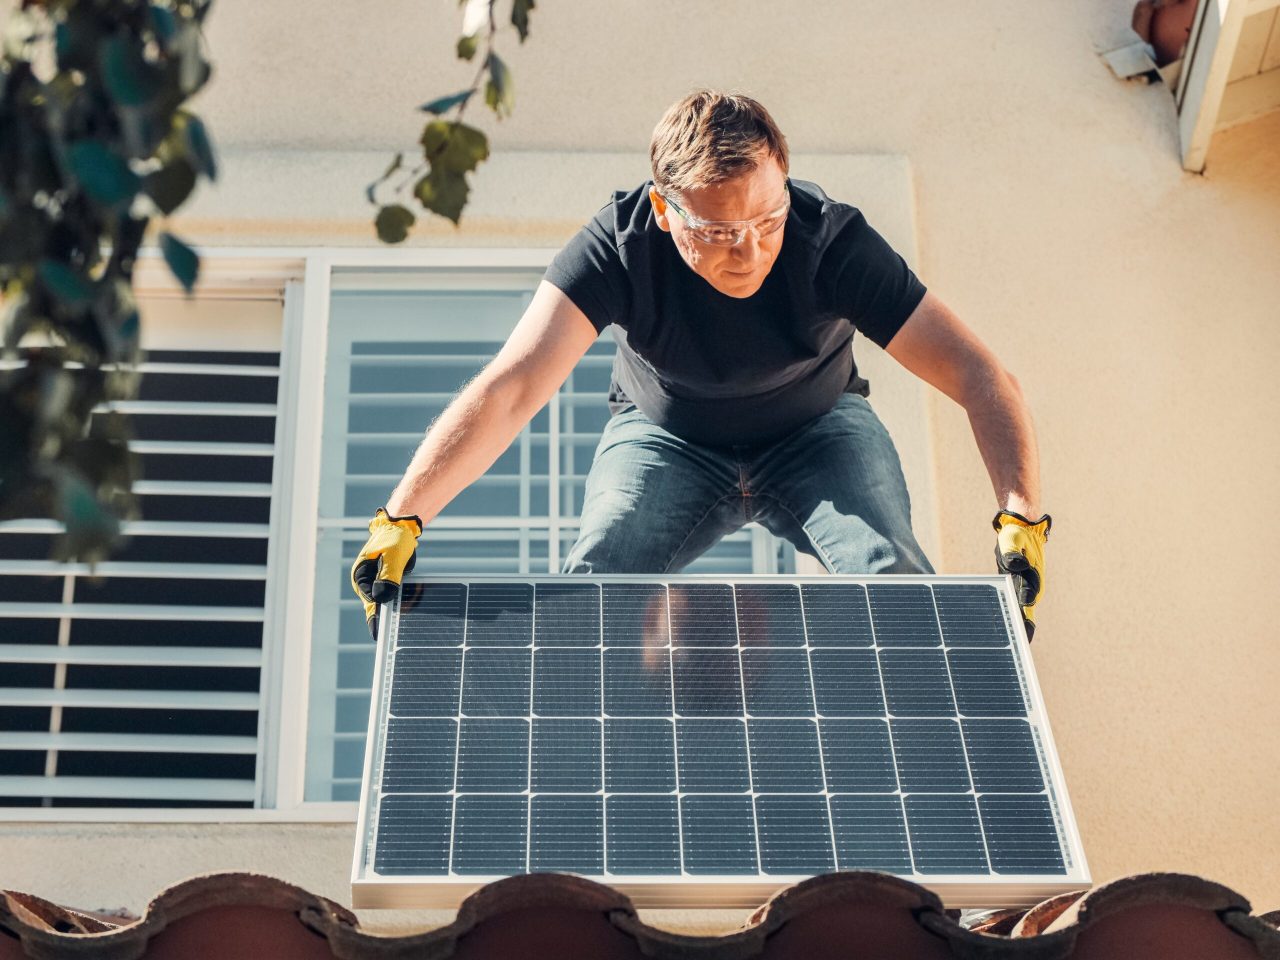 invest in solar panels for an Eco-friendly retirement